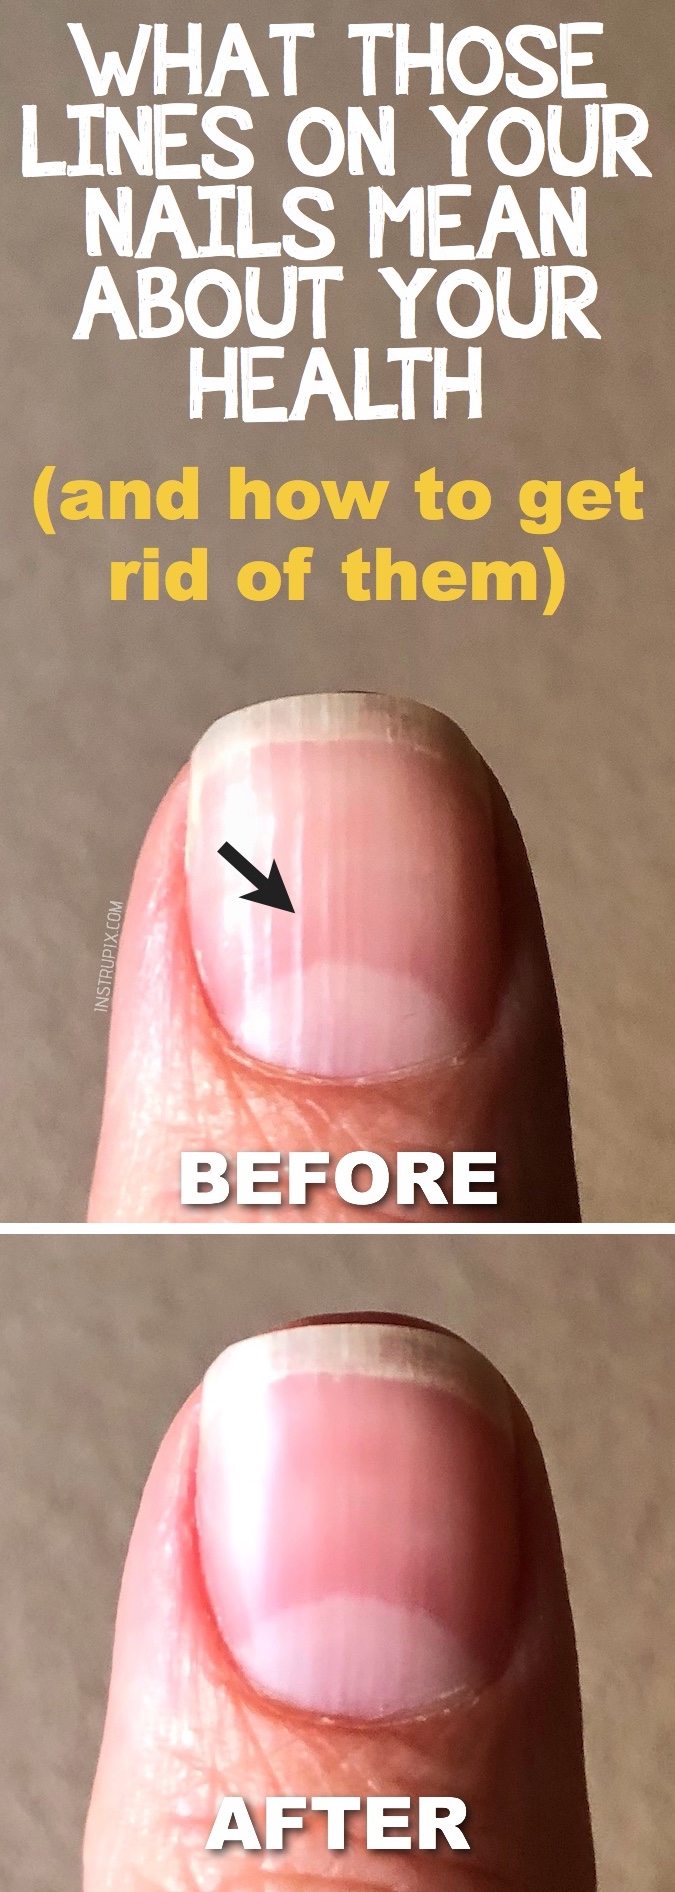 How to Apply Press-on Nails Like an Expert - Fake Nail How-To Tips and  Tricks